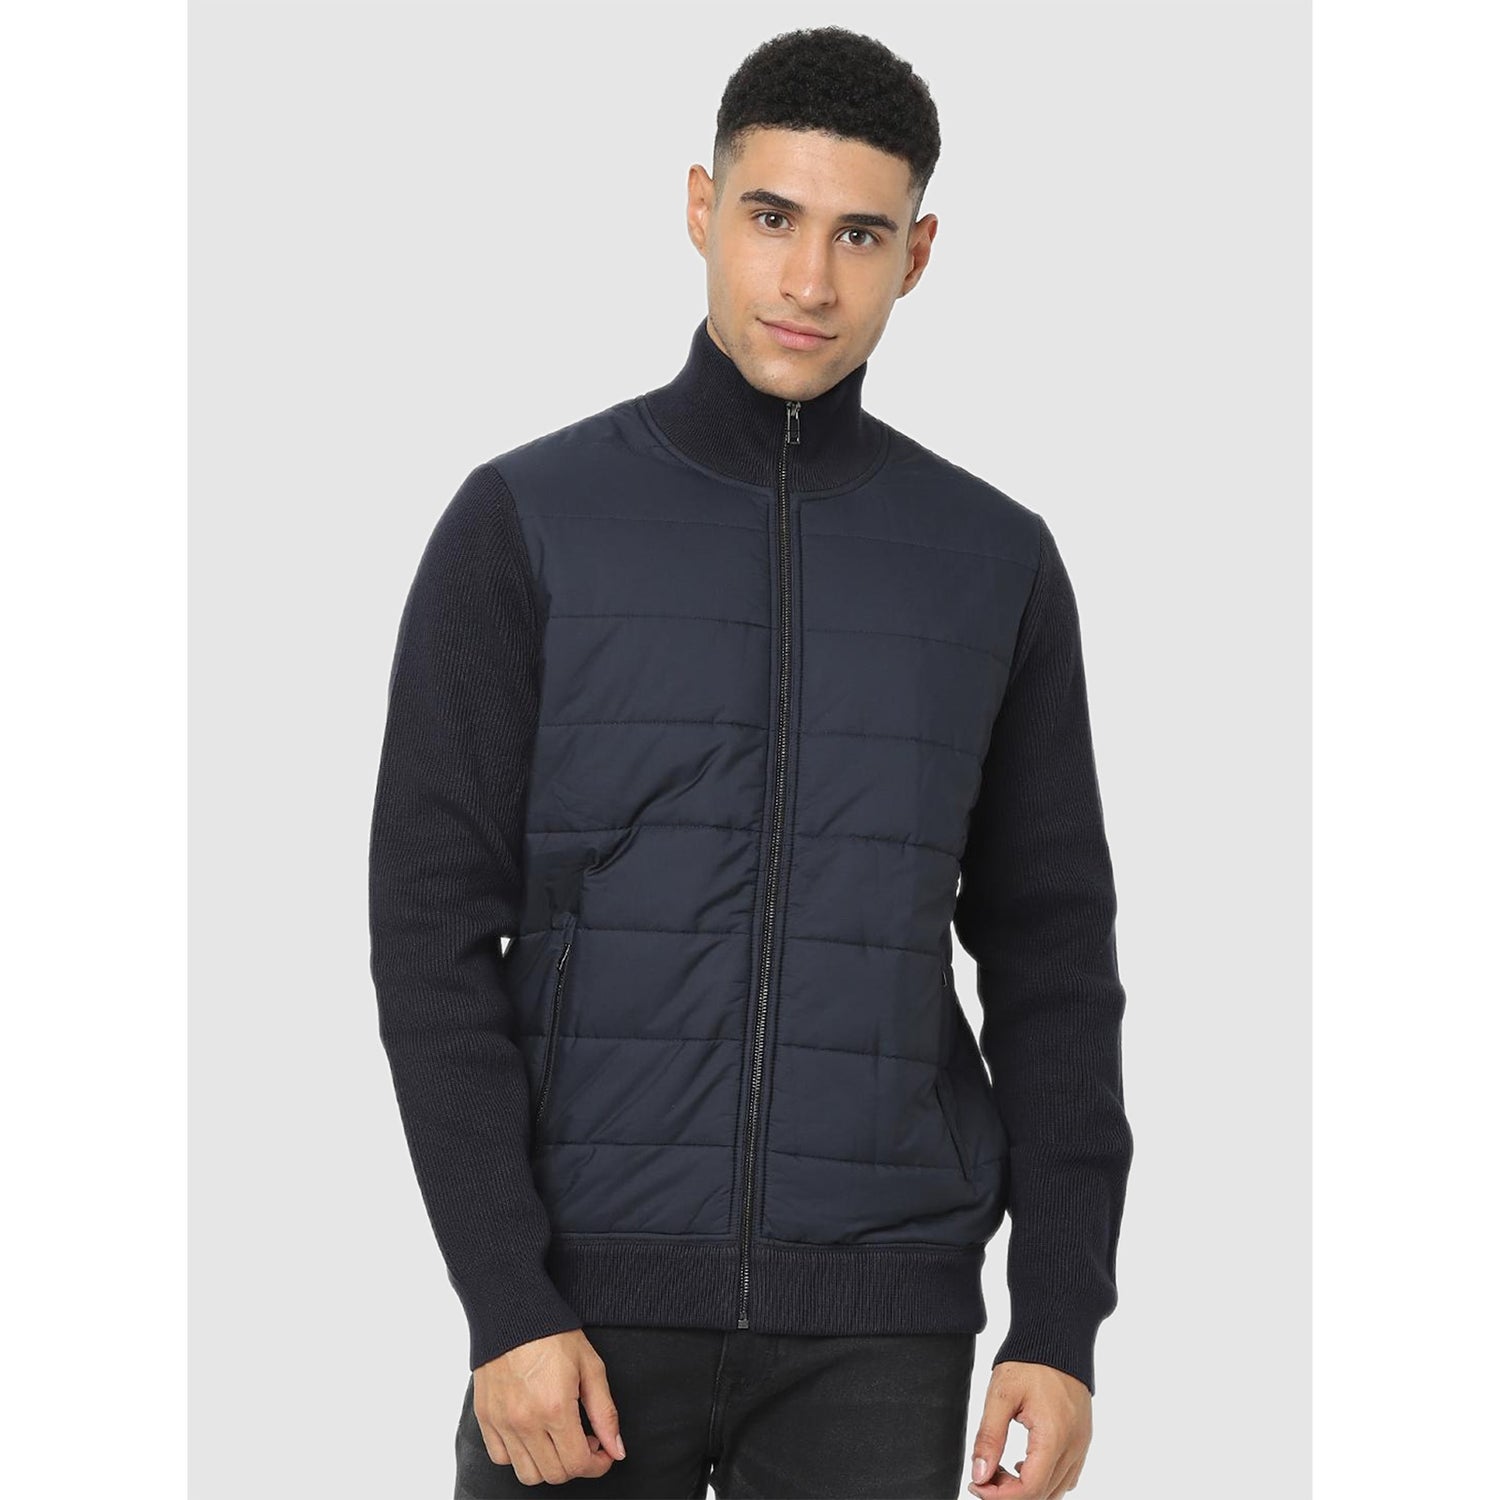 Navy Solid Regular Fit Jacket (Various Sizes)